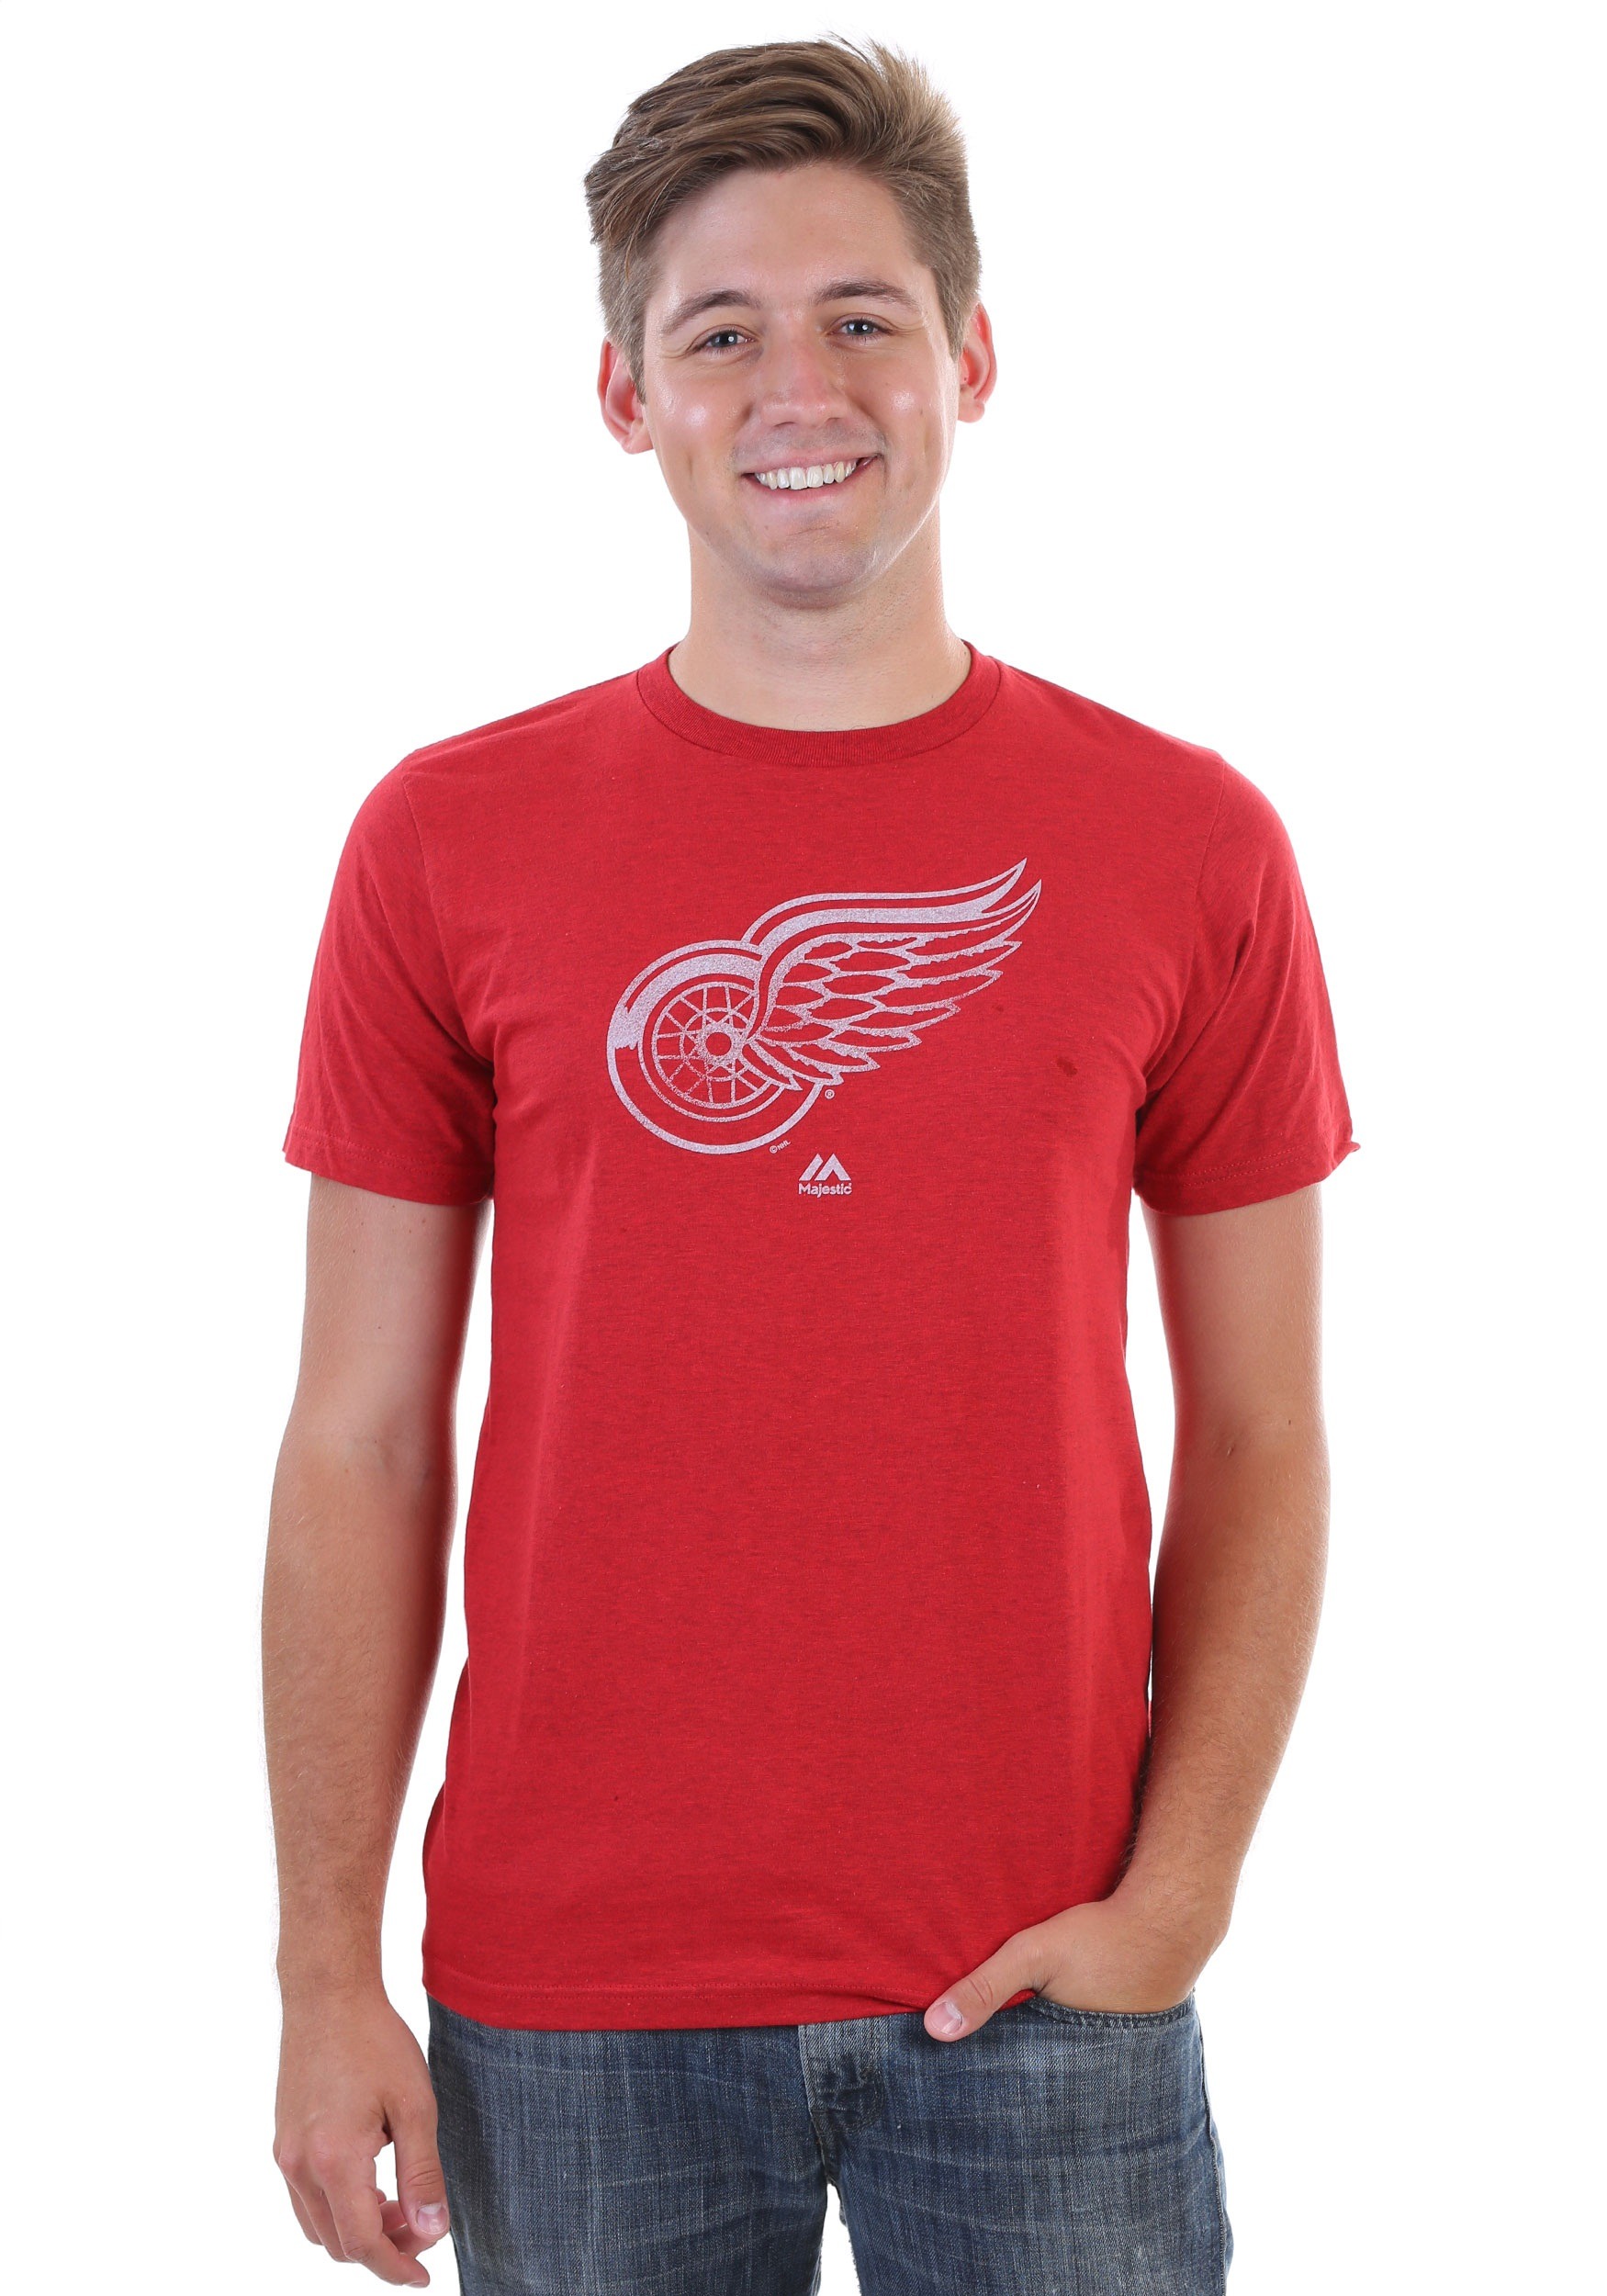 red wings t shirt